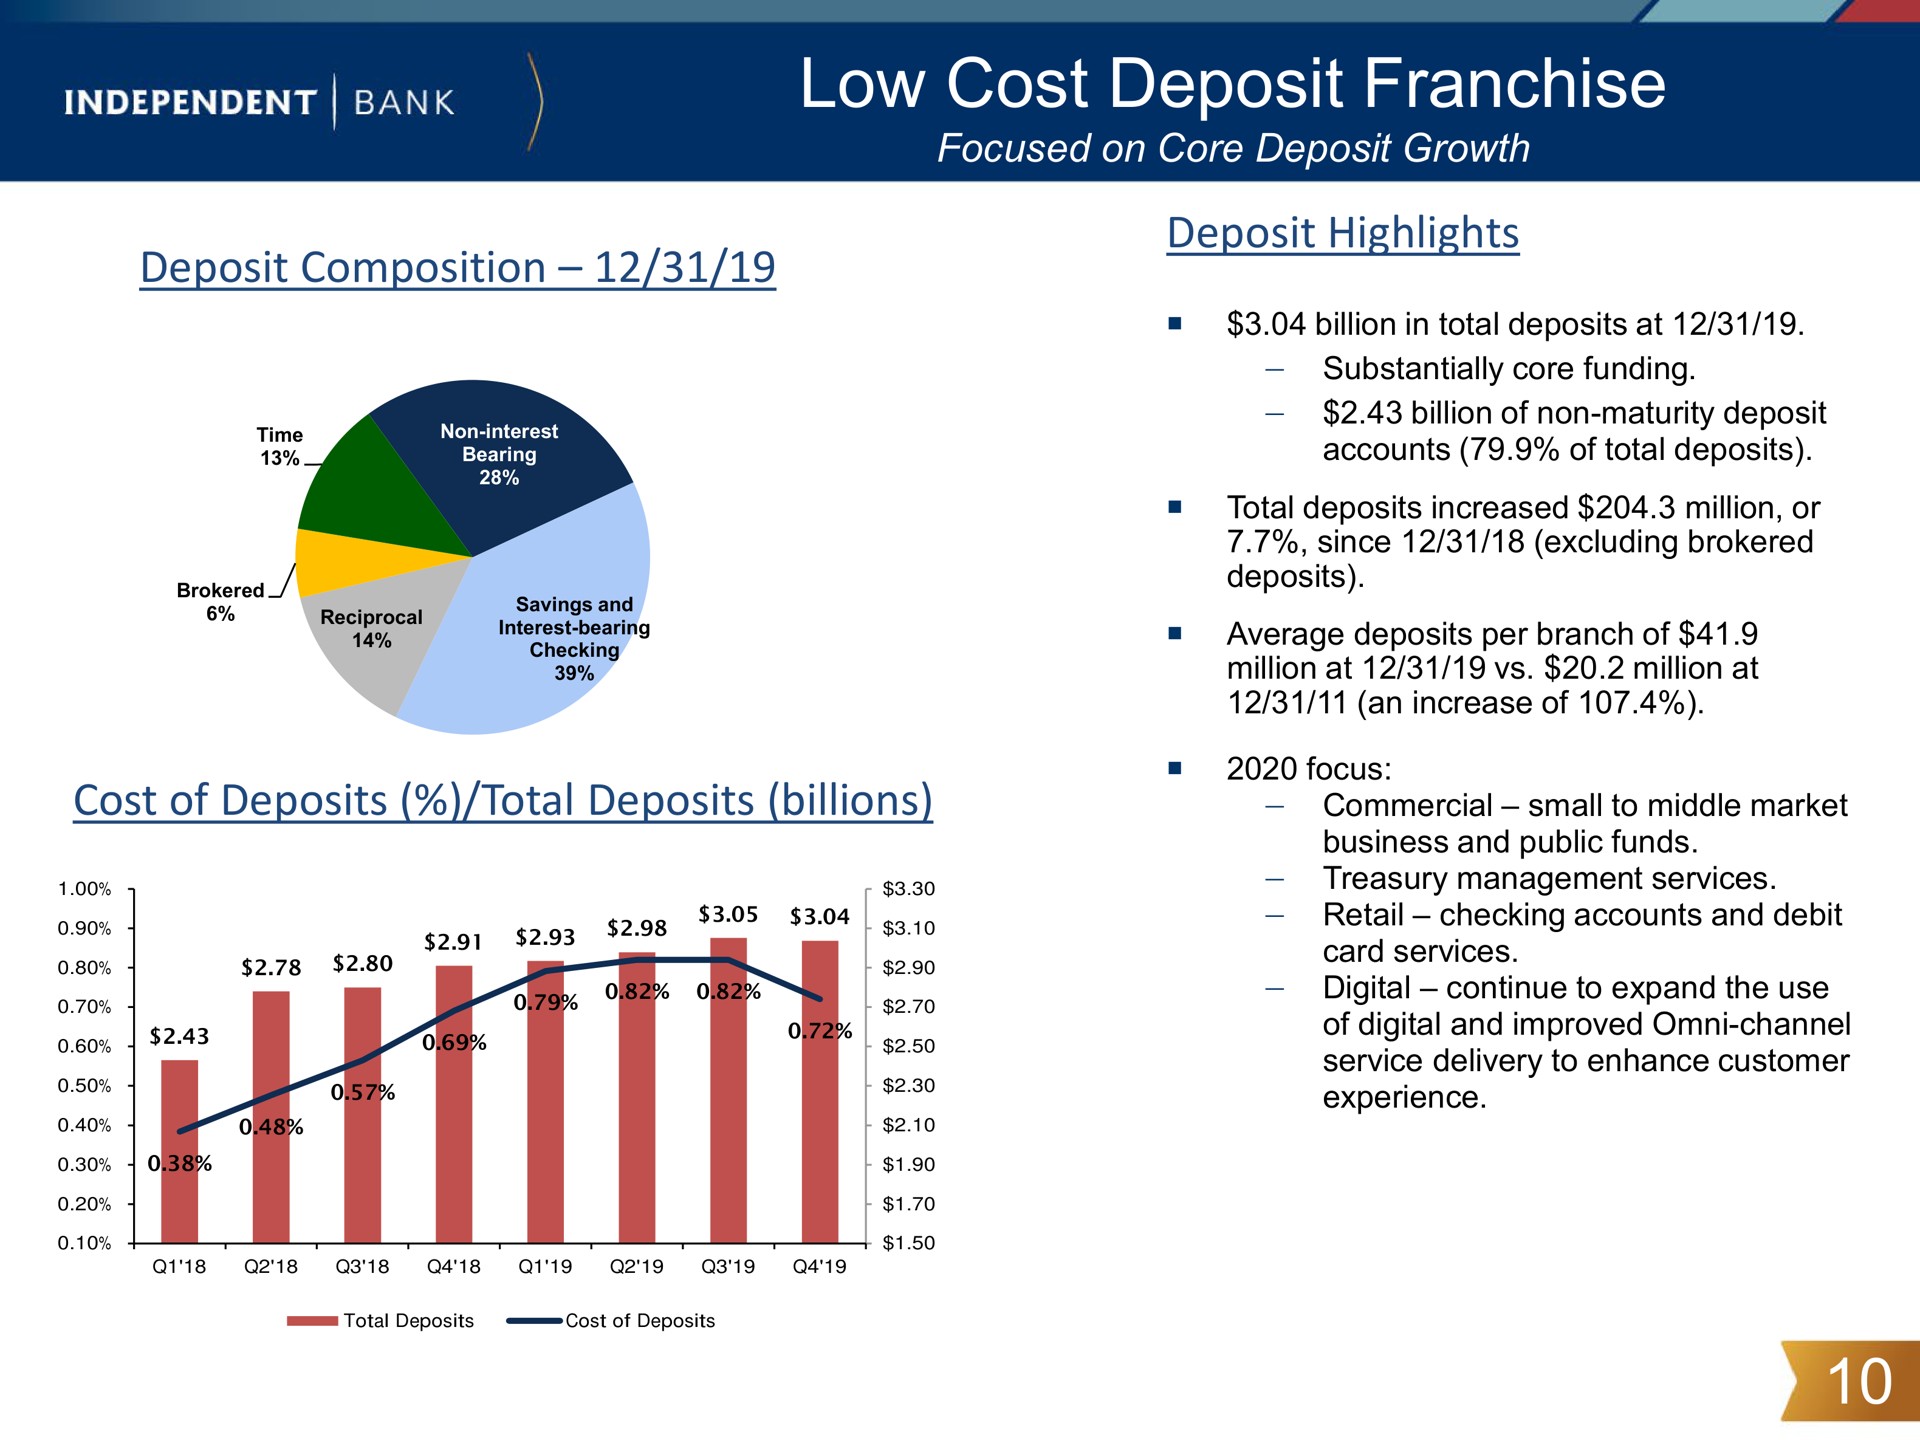 low cost deposit franchise tape | Independent Bank Corp